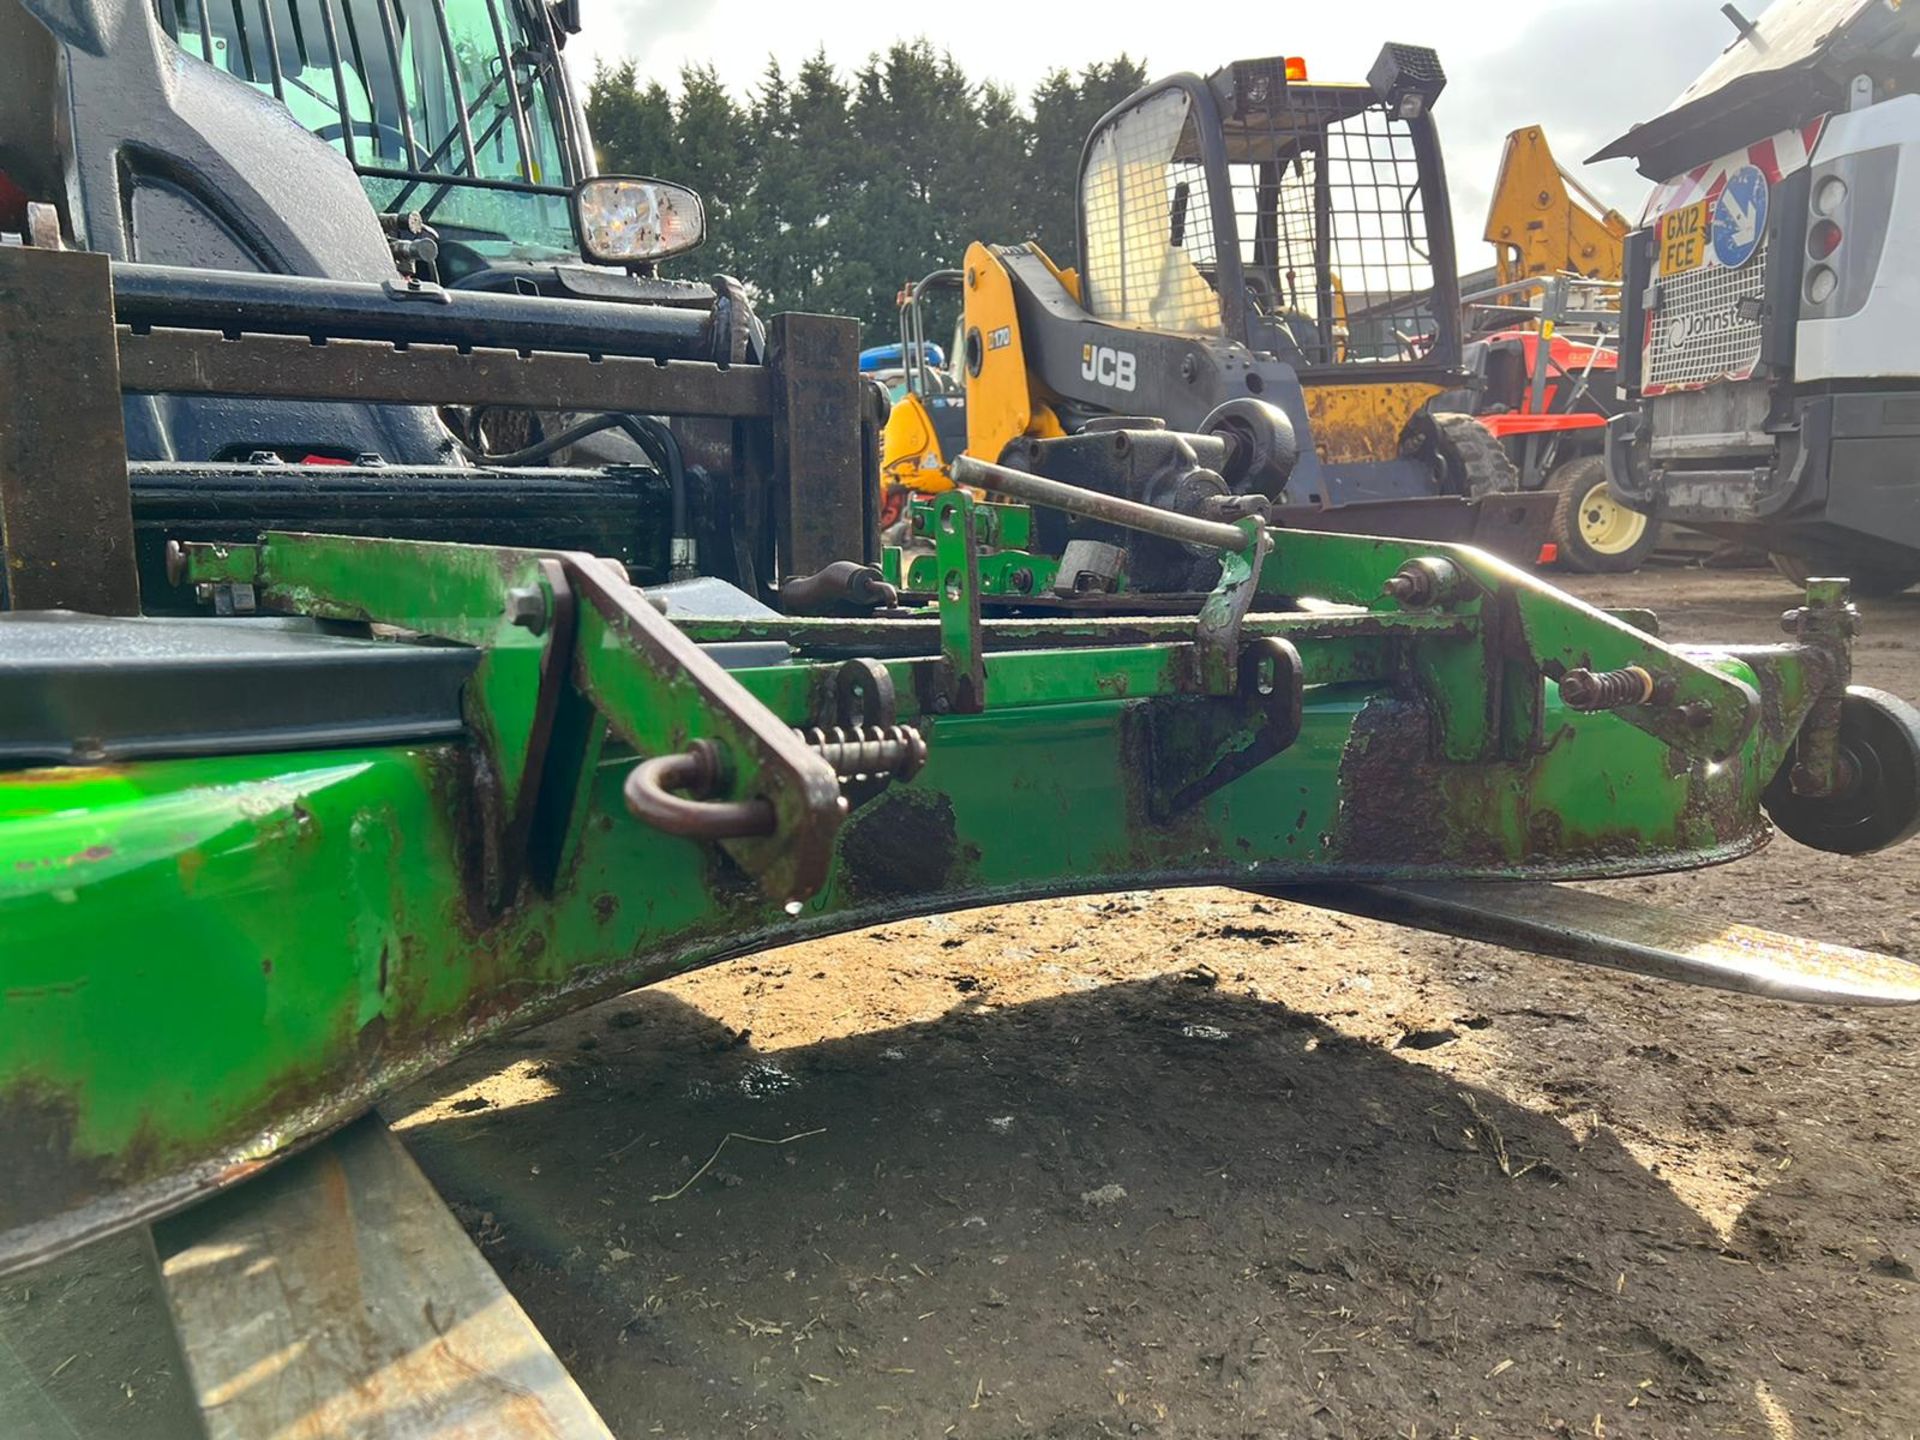 2010 JOHN DEERE 72" MID MOUNTED TRACTOR ROTARY DECK, GOOD SOLID TRIPLE BLADED BECK, WEIGHT 199kg - Image 5 of 12